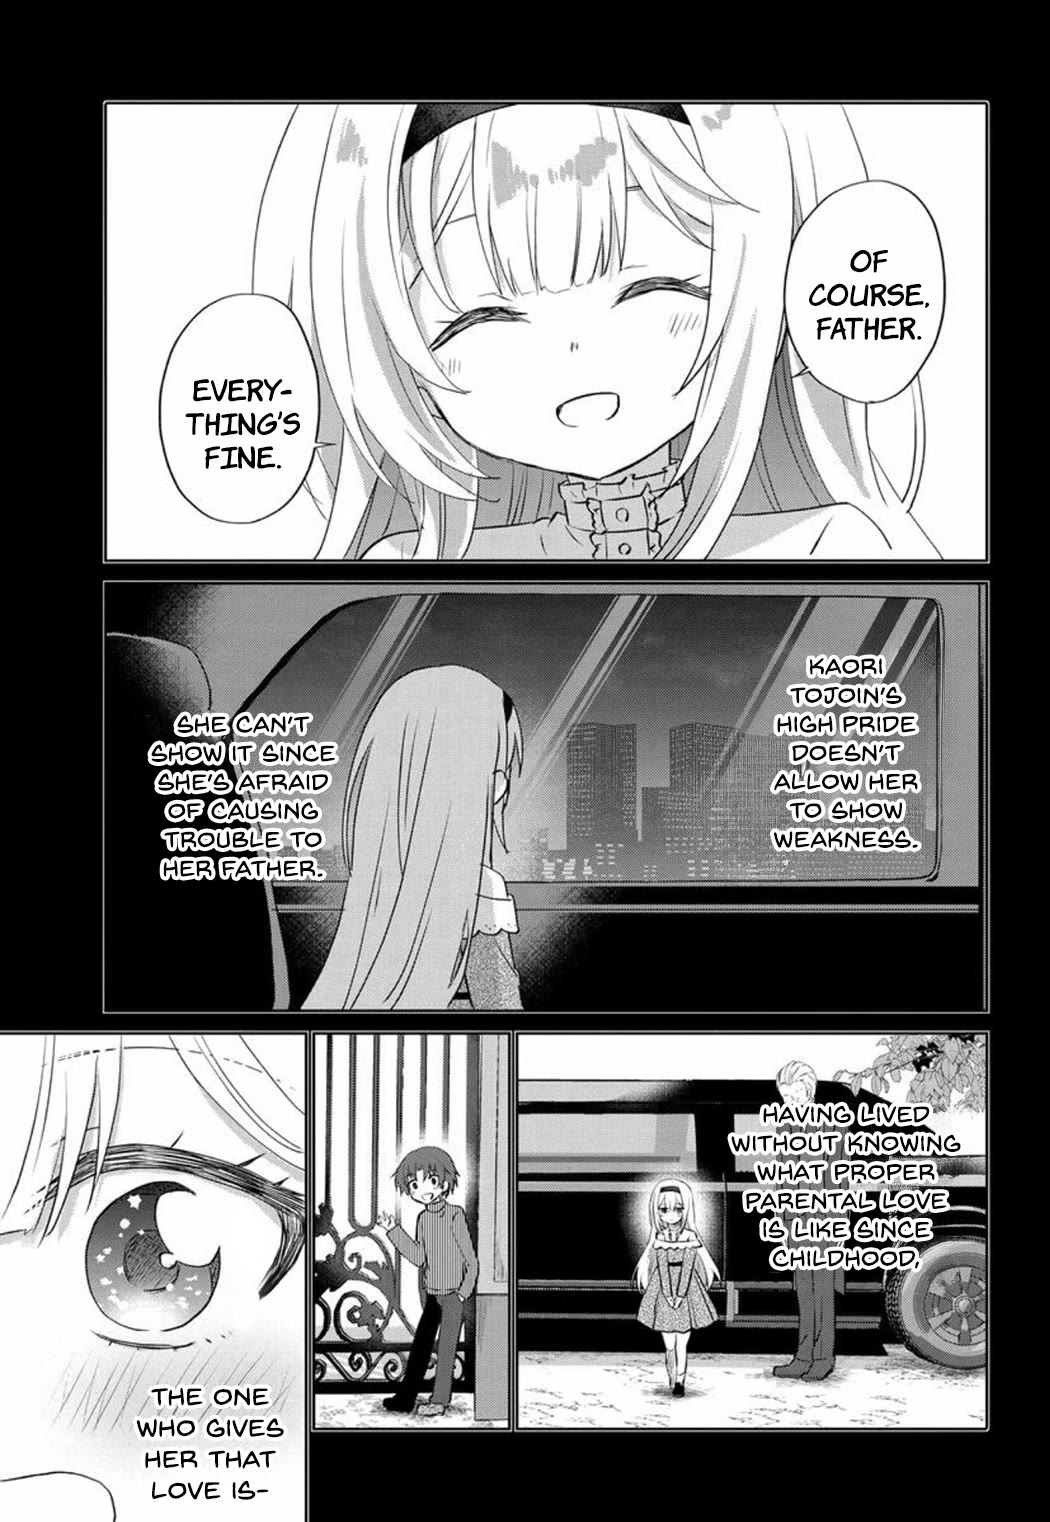 Since I’Ve Entered The World Of Romantic Comedy Manga, I’Ll Do My Best To Make The Losing Heroine Happy - chapter 8 - #3